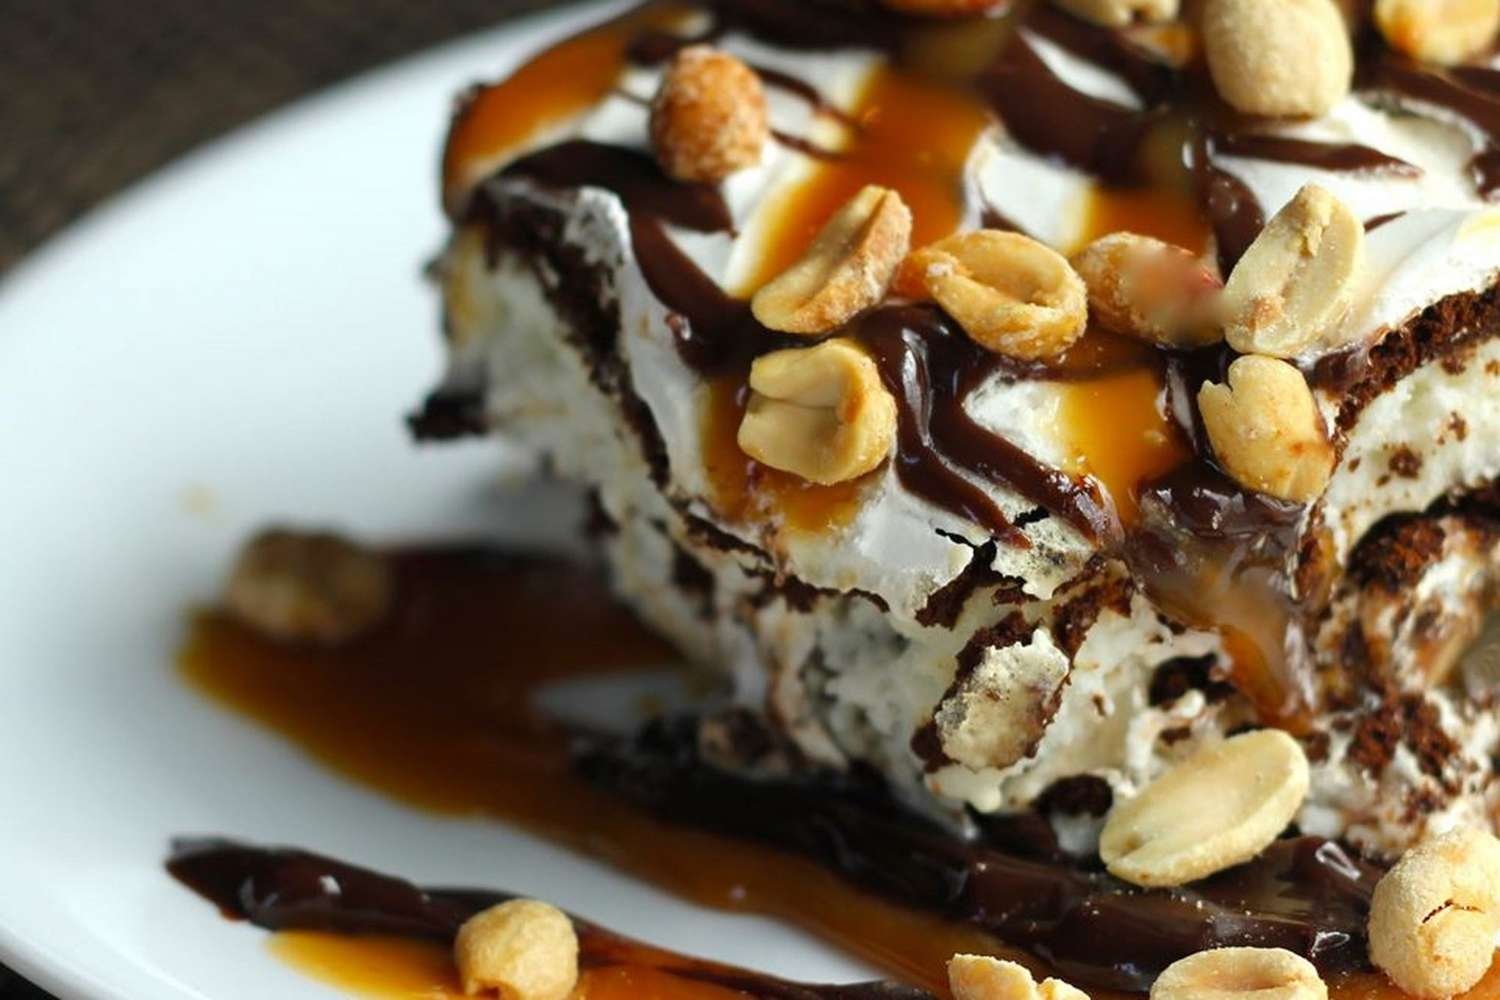 Our 20 Best Potluck Dessert Recipes of All Time Will Make You a Potluck Legend